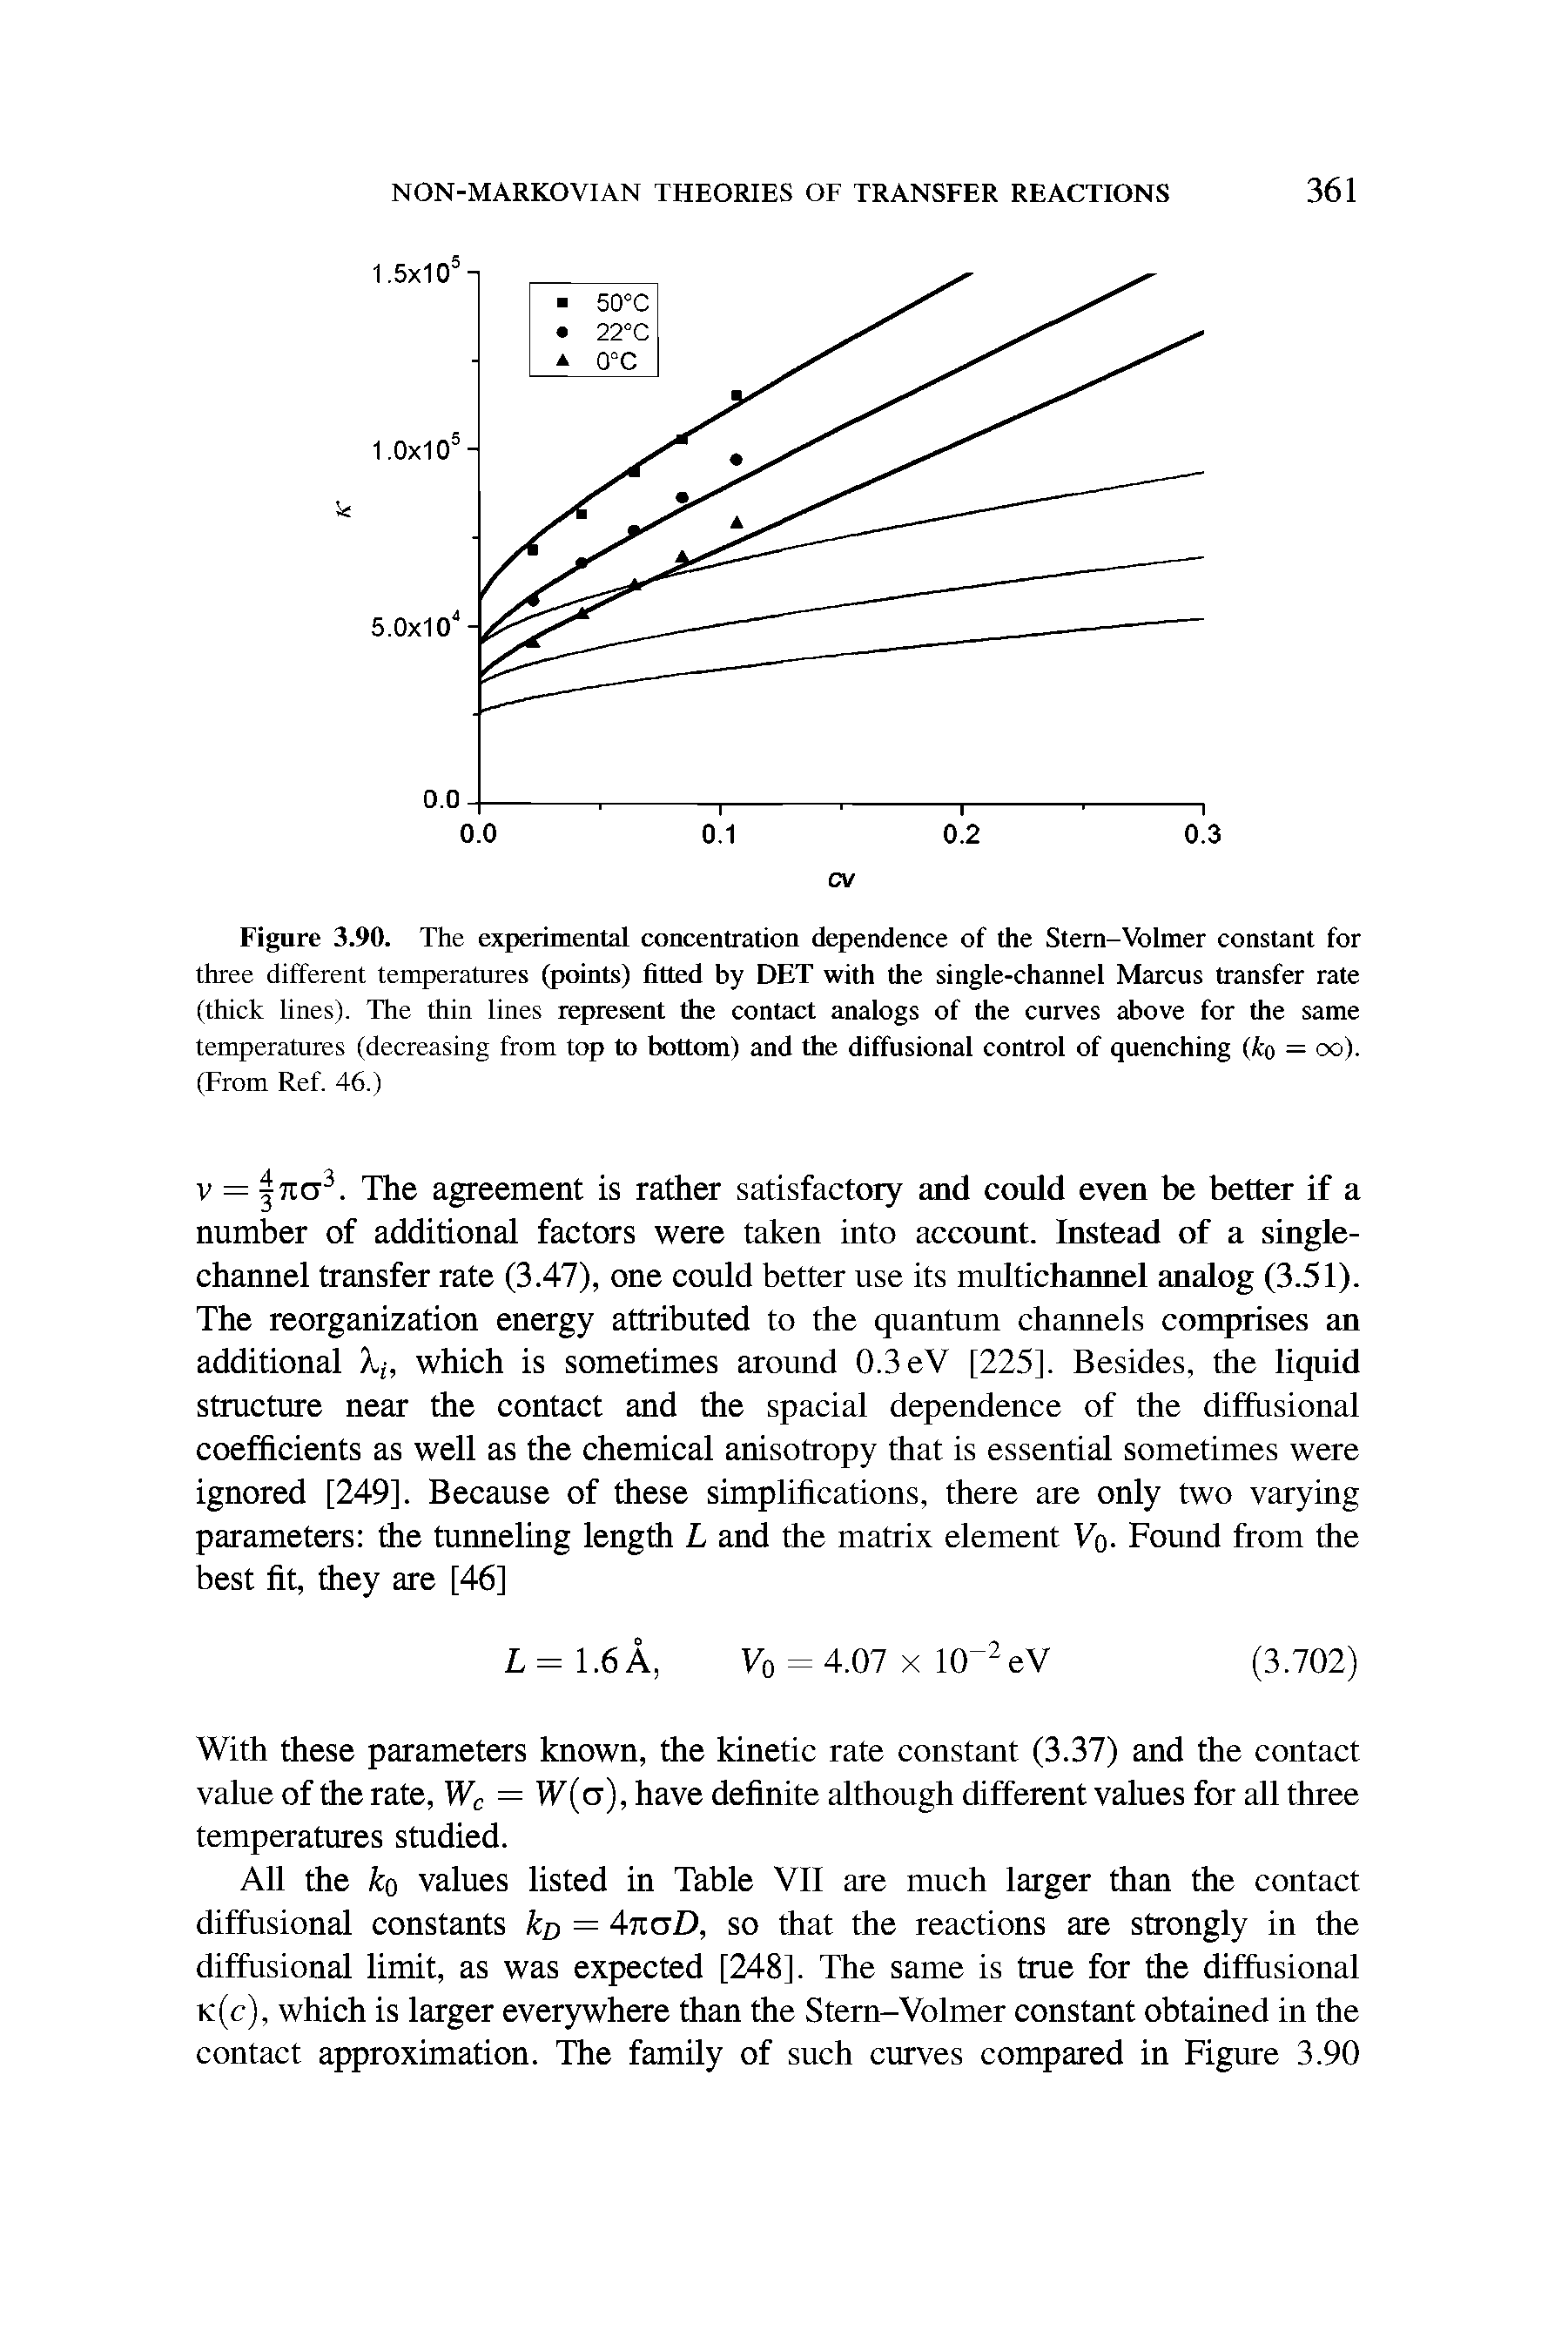 Figure 3.90. The experimental concentration dependence of the Stern-Volmer constant for three different temperatures (points) fitted by DET with the single-channel Marcus transfer rate (thick lines). The thin lines represent the contact analogs of the curves above for the same temperatures (decreasing from top to bottom) and the diffusional control of quenching ( o = oo). (From Ref. 46.)...